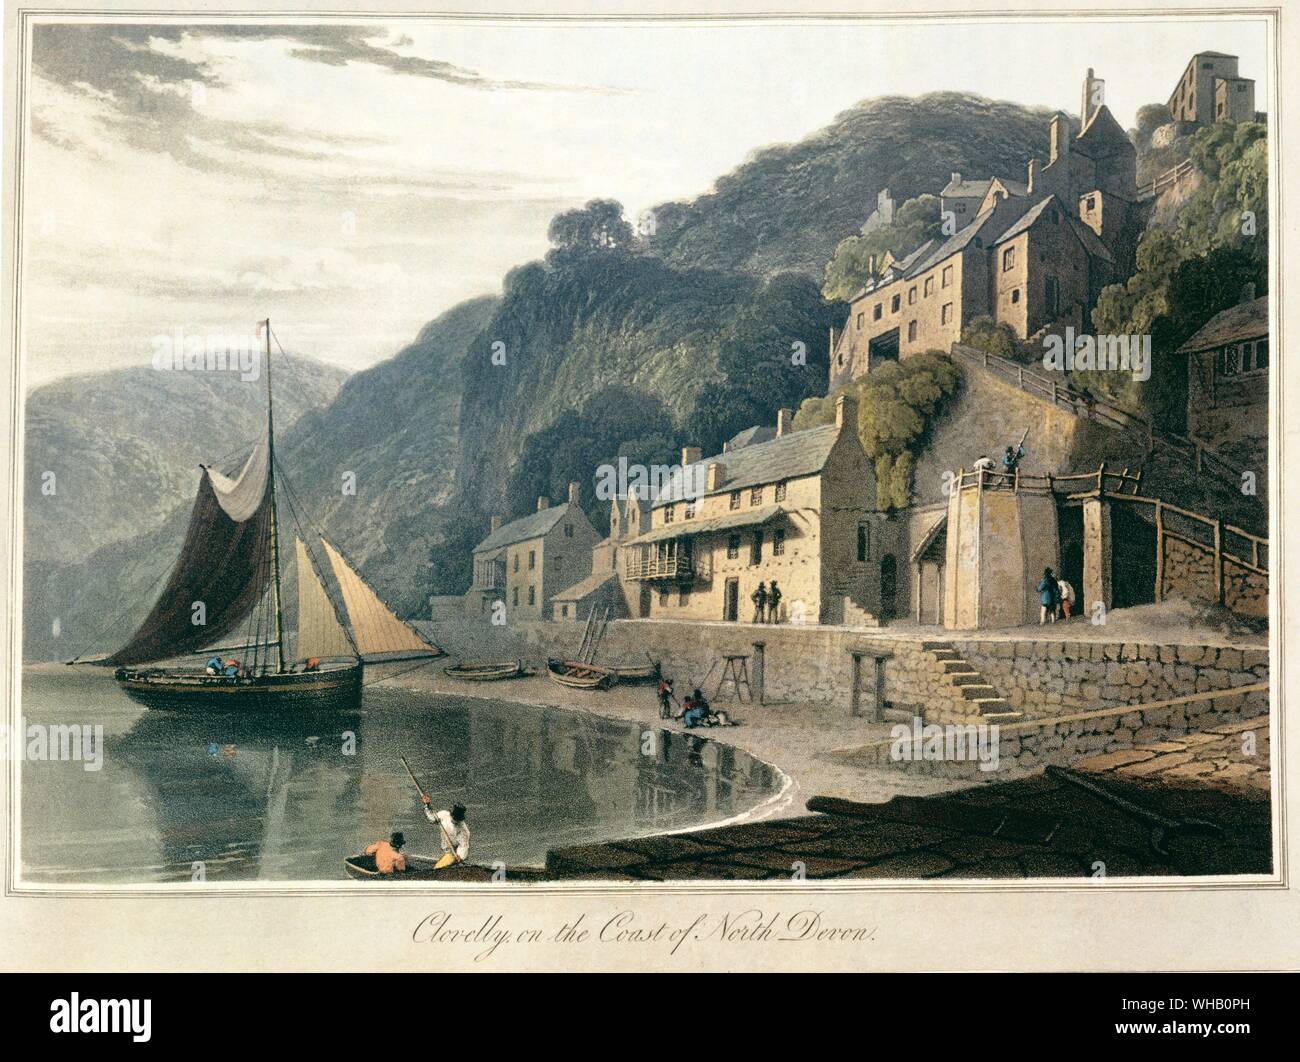 Clovelly - 1814. From - A Voyage Round Great Britain. by Richard Ayrton. Lithograph by William Darriell (1769-1837) - English painter. Born in Kingston-upon-Thames in Surrey. His father was a bricklayer and owner of a public house called The Swan in near-by Chertsey. His uncle was an artist and later Royal Academician, and William became his pupil. Uncle and nephew left Britain in April 1785 to voyage throughout China and India. In Calcutta in 1791, they held a lottery of their combined paintings, using the proceeds to continue their travelling and sketching. They returned to Britain in 1794, Stock Photo